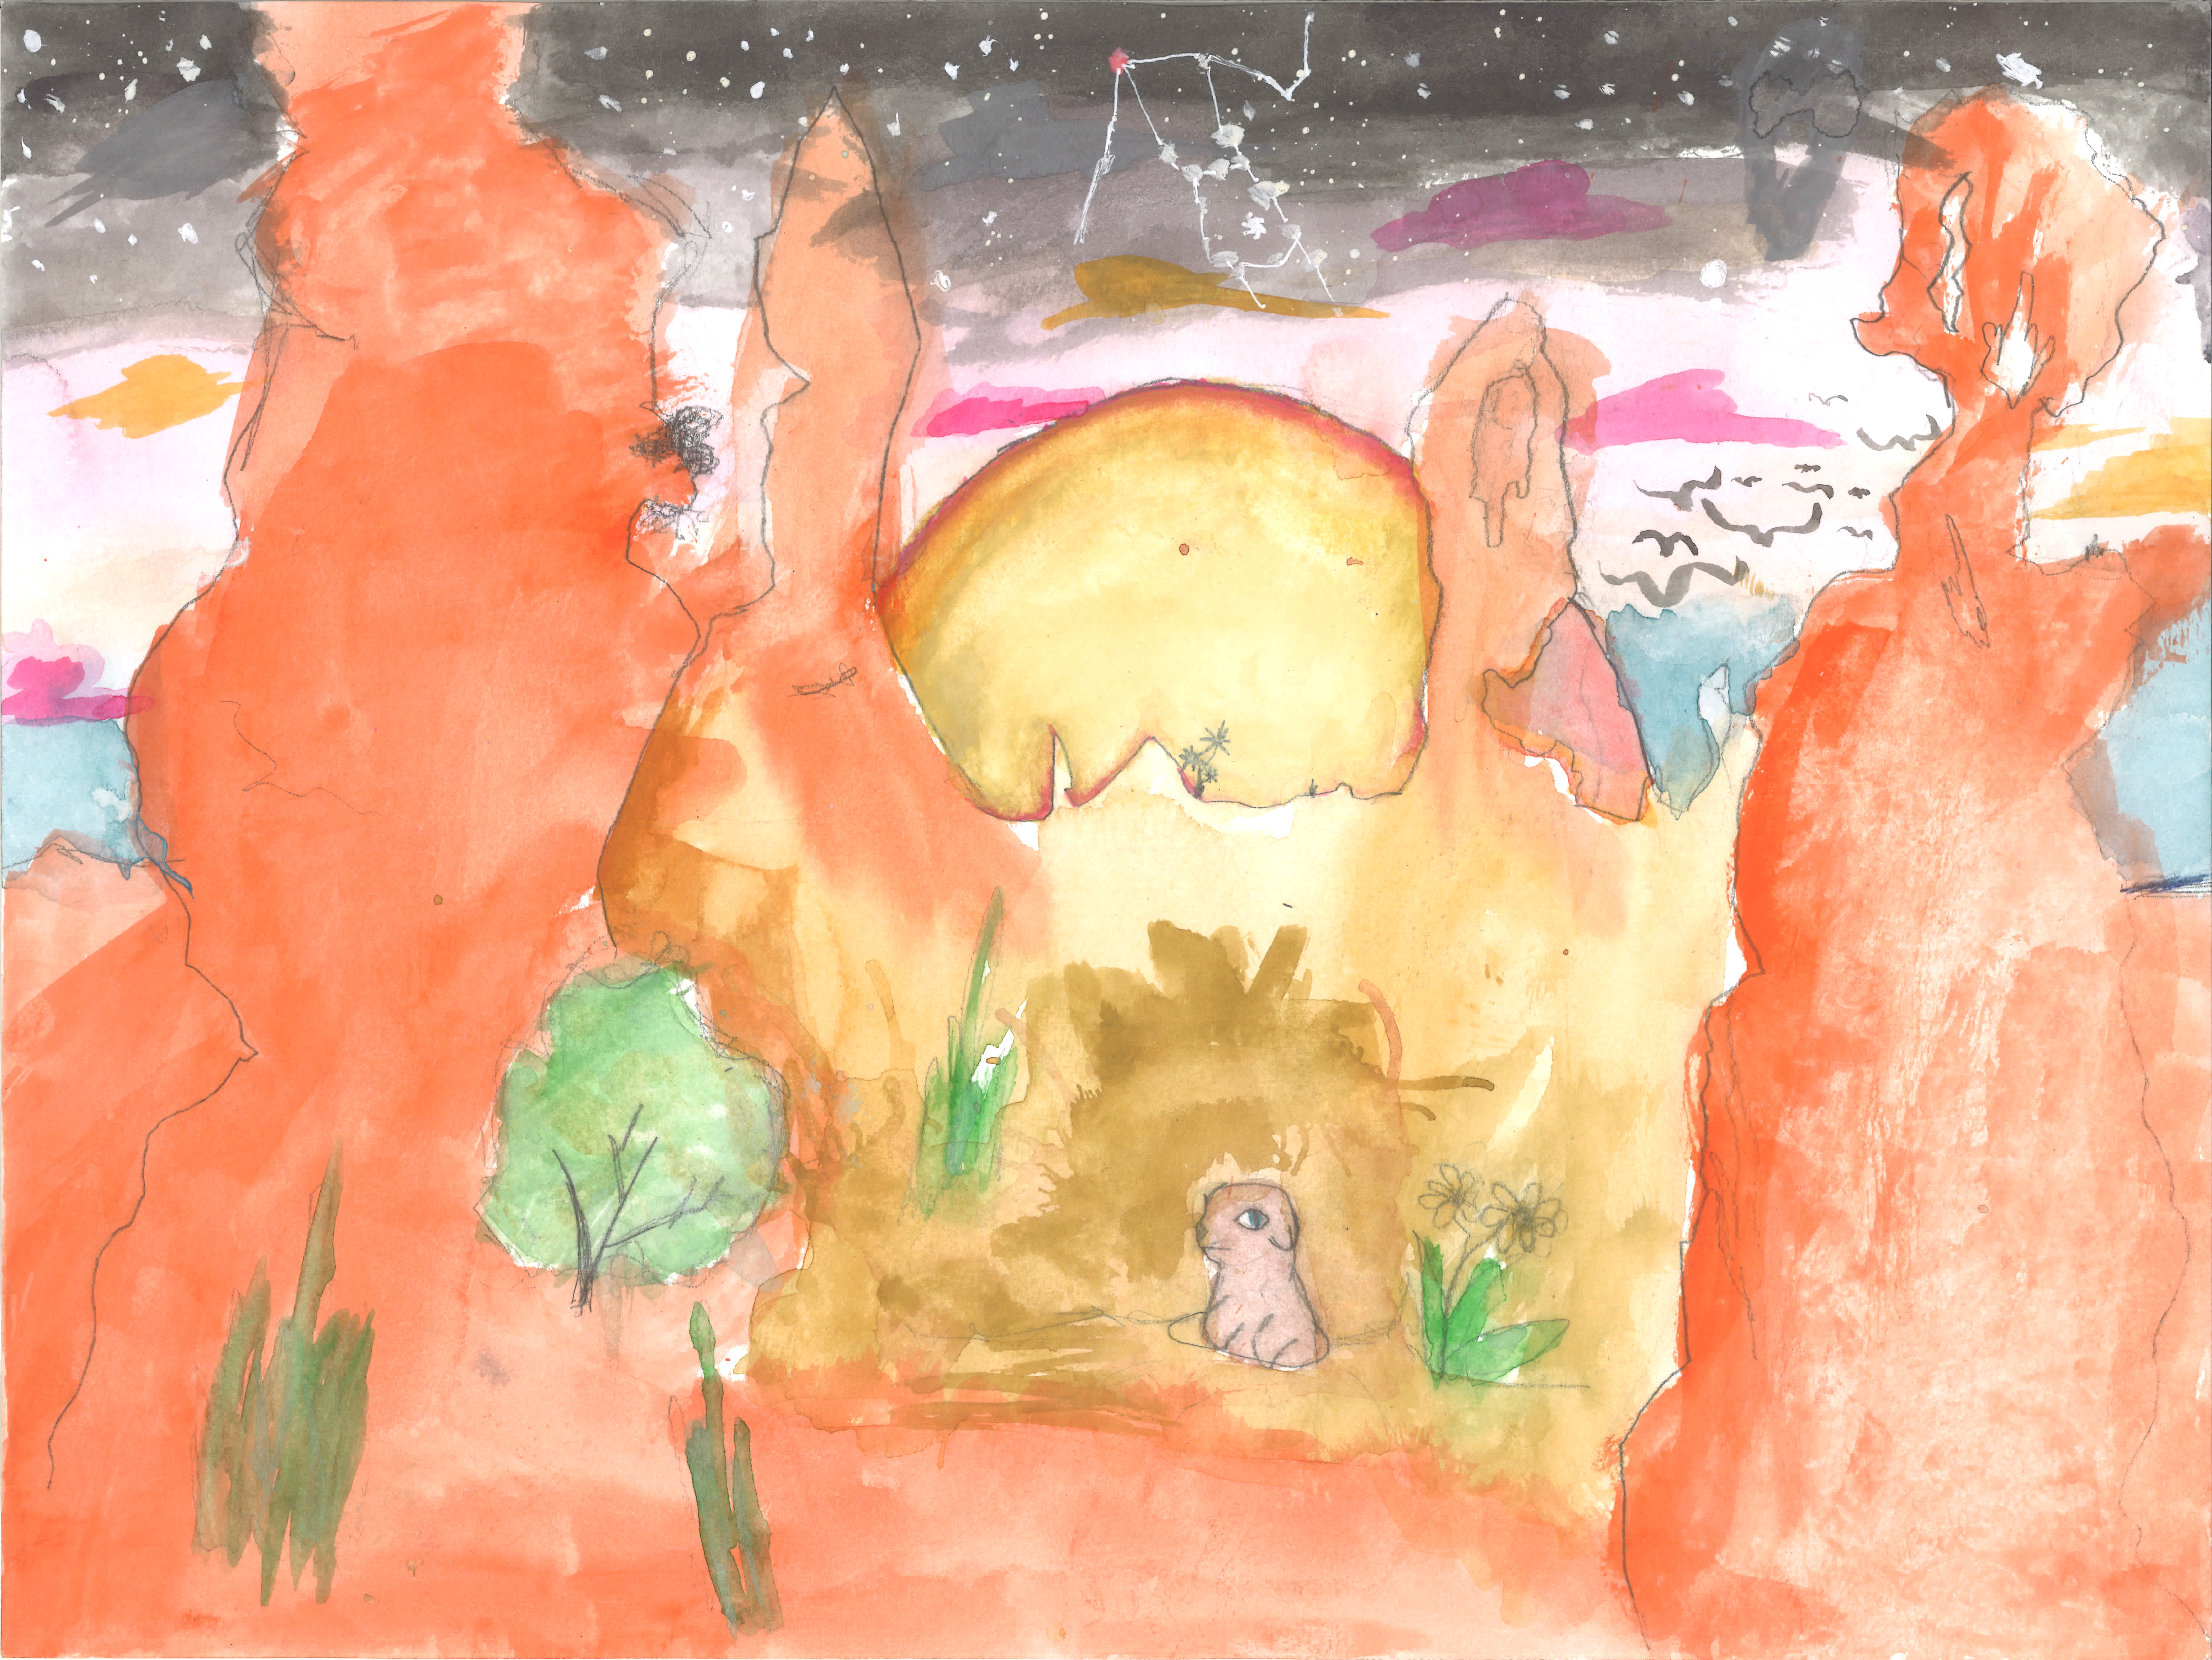 A watercolor illustration of a red rock landscape with a small tawny mammal, the Utah Prairie Dog, emerging from a hole. Above are stars and birds.